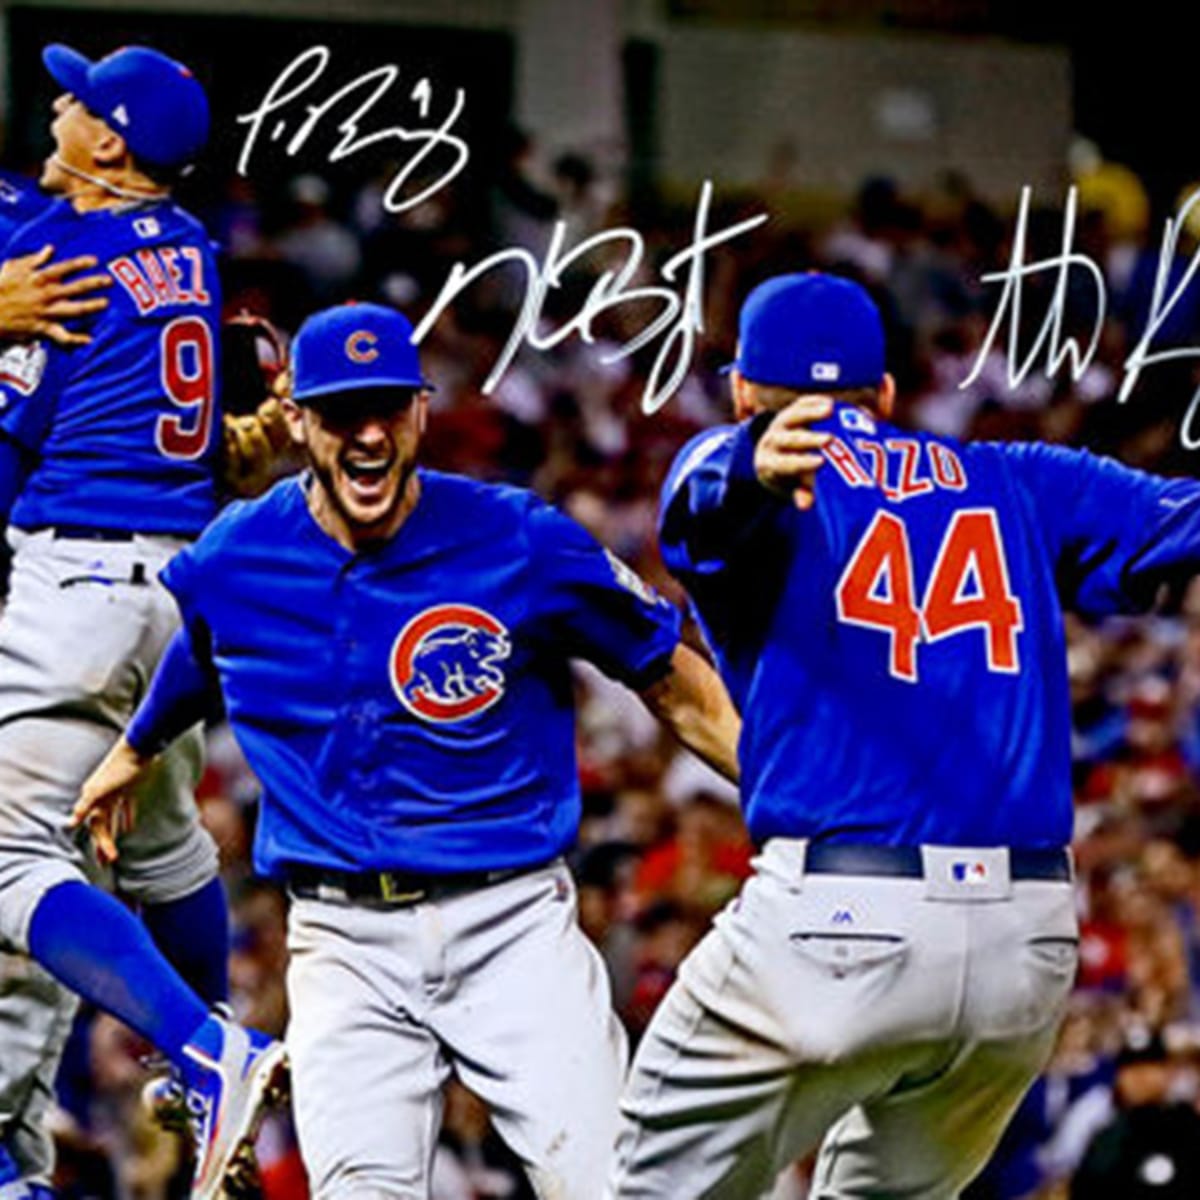 Chicago Cubs World Series Autographed Celebration photo - Sports Illustrated